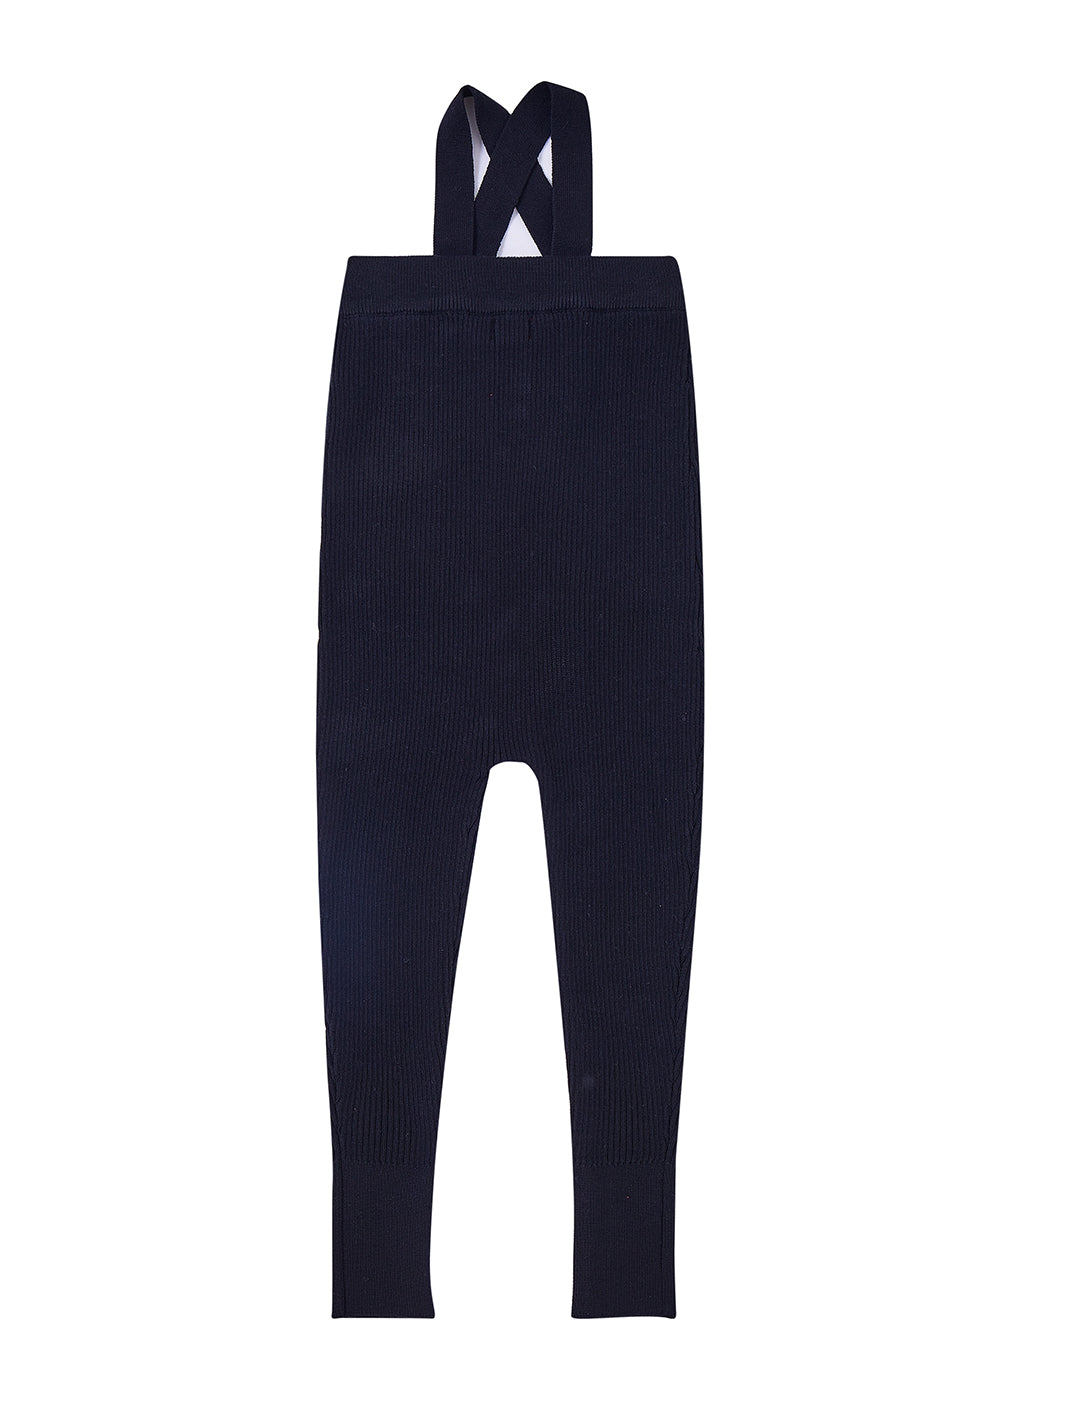 Overall Straps Overall - Black